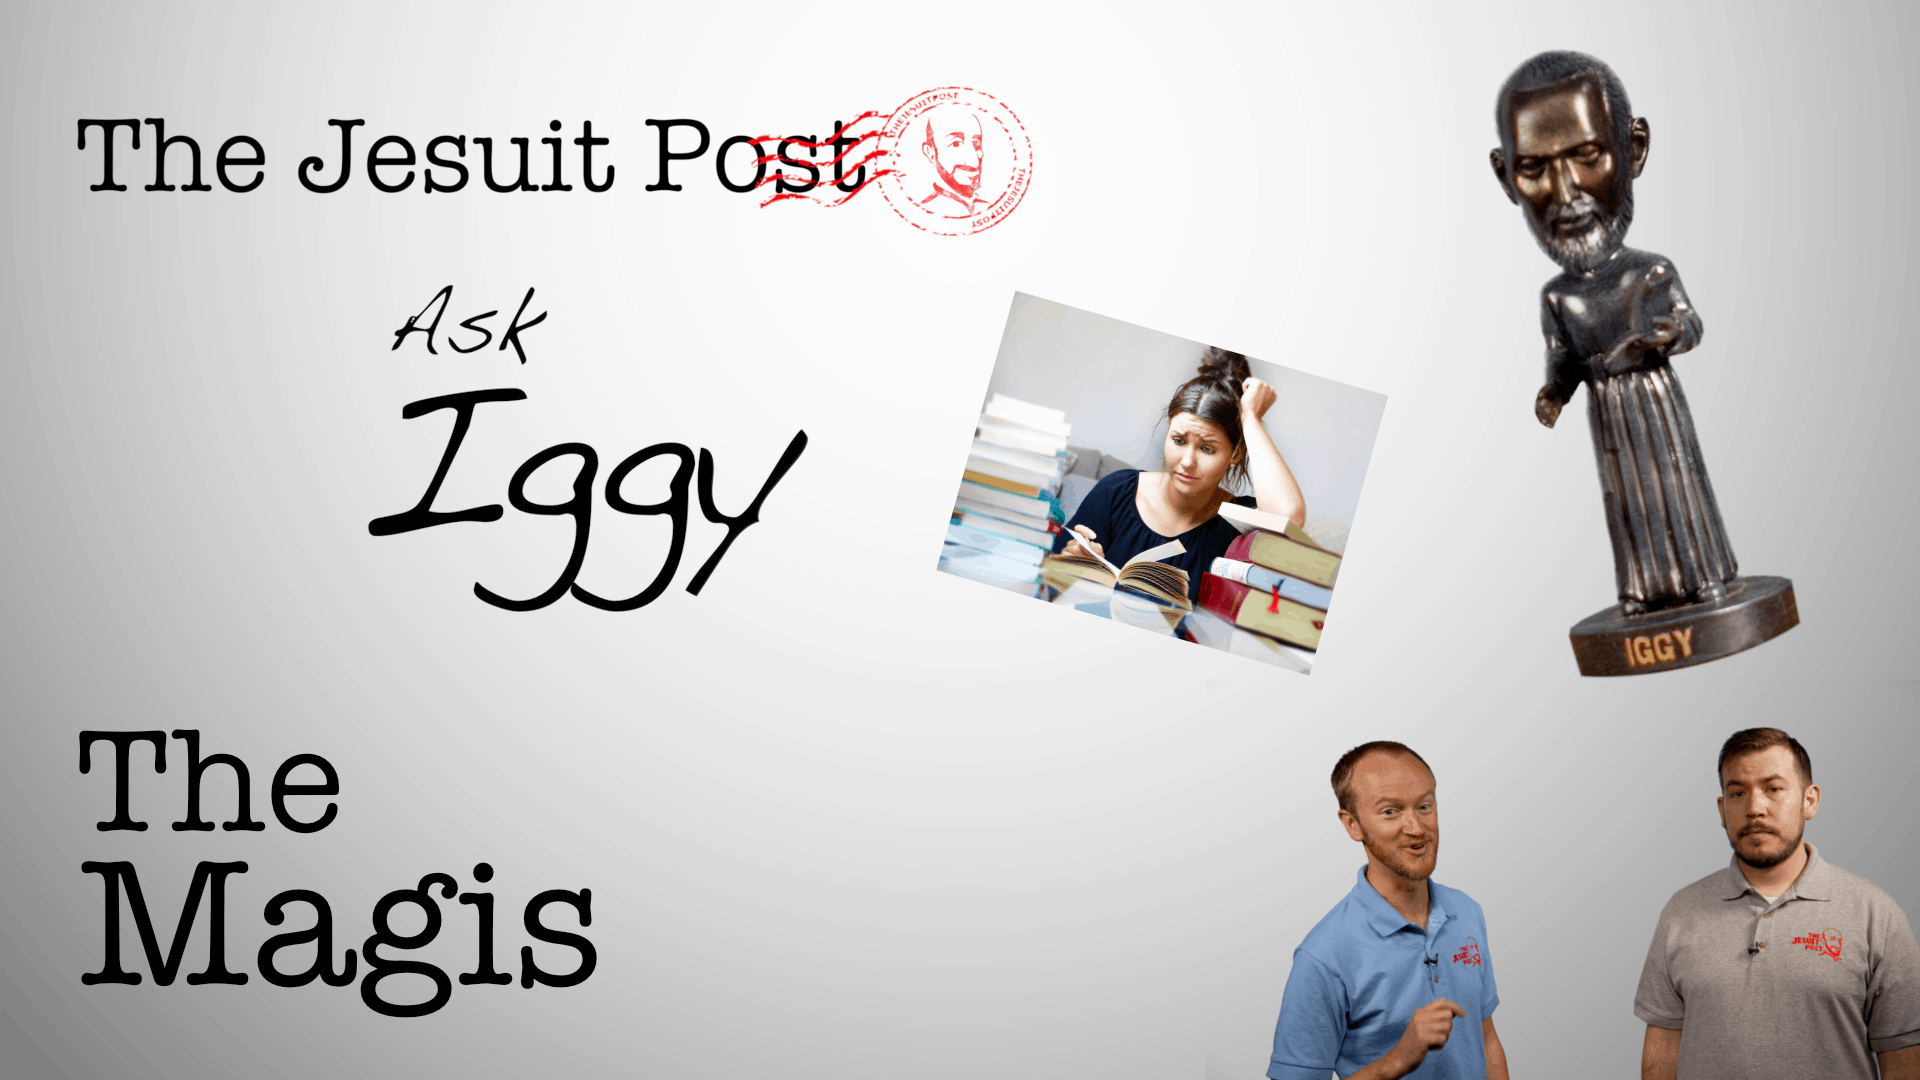 Ask Iggy: “What Does Magis Mean?